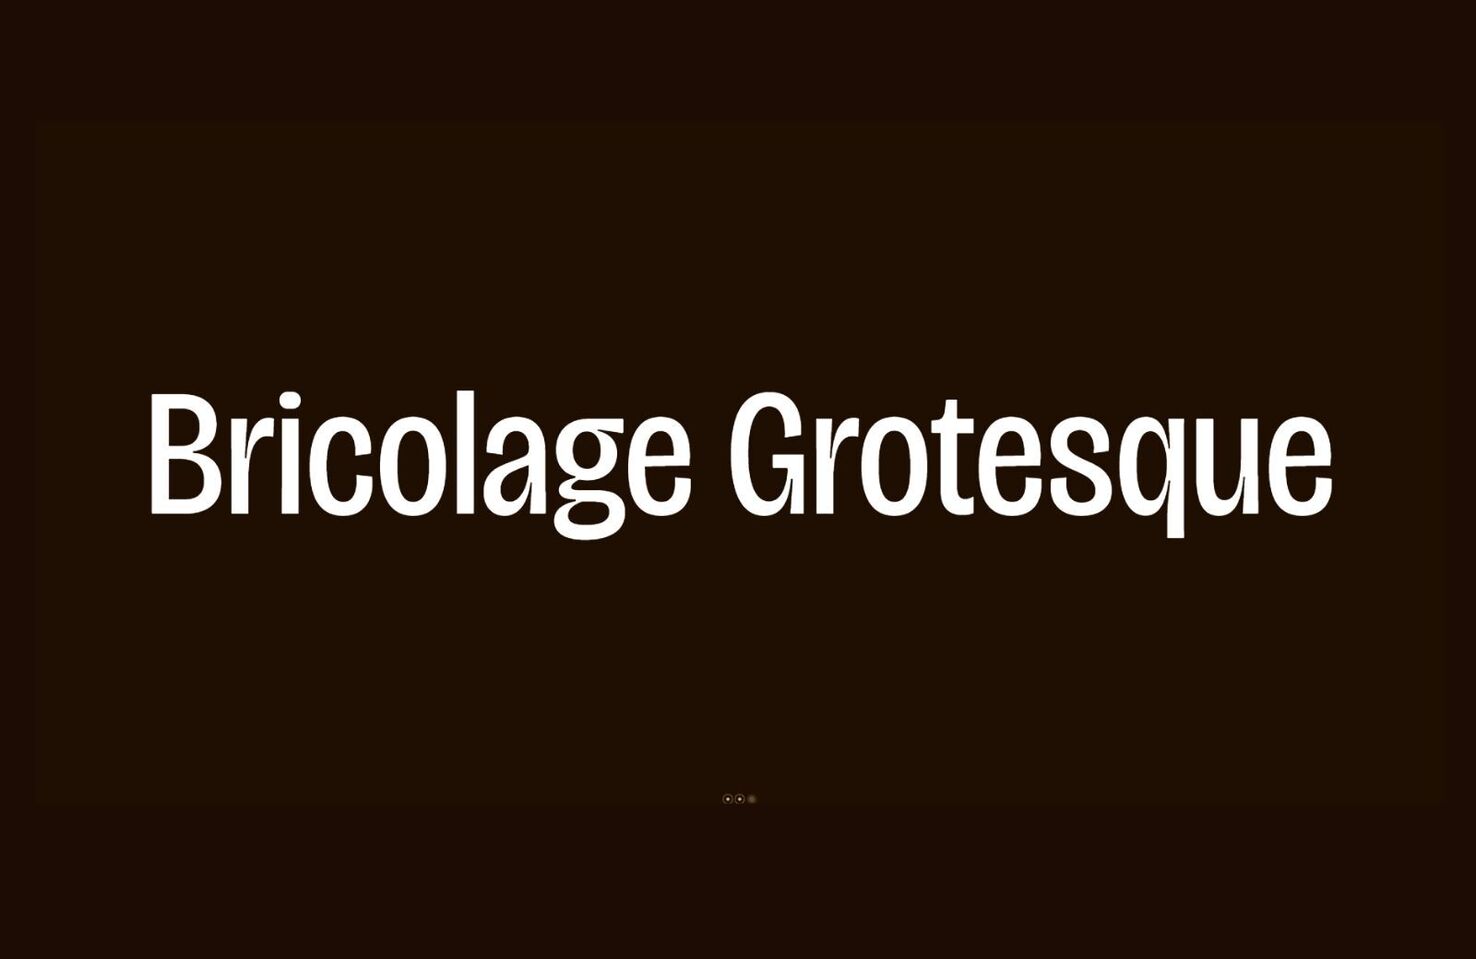 Bricolage Grotesque SemiCondensed SemiBold Font preview